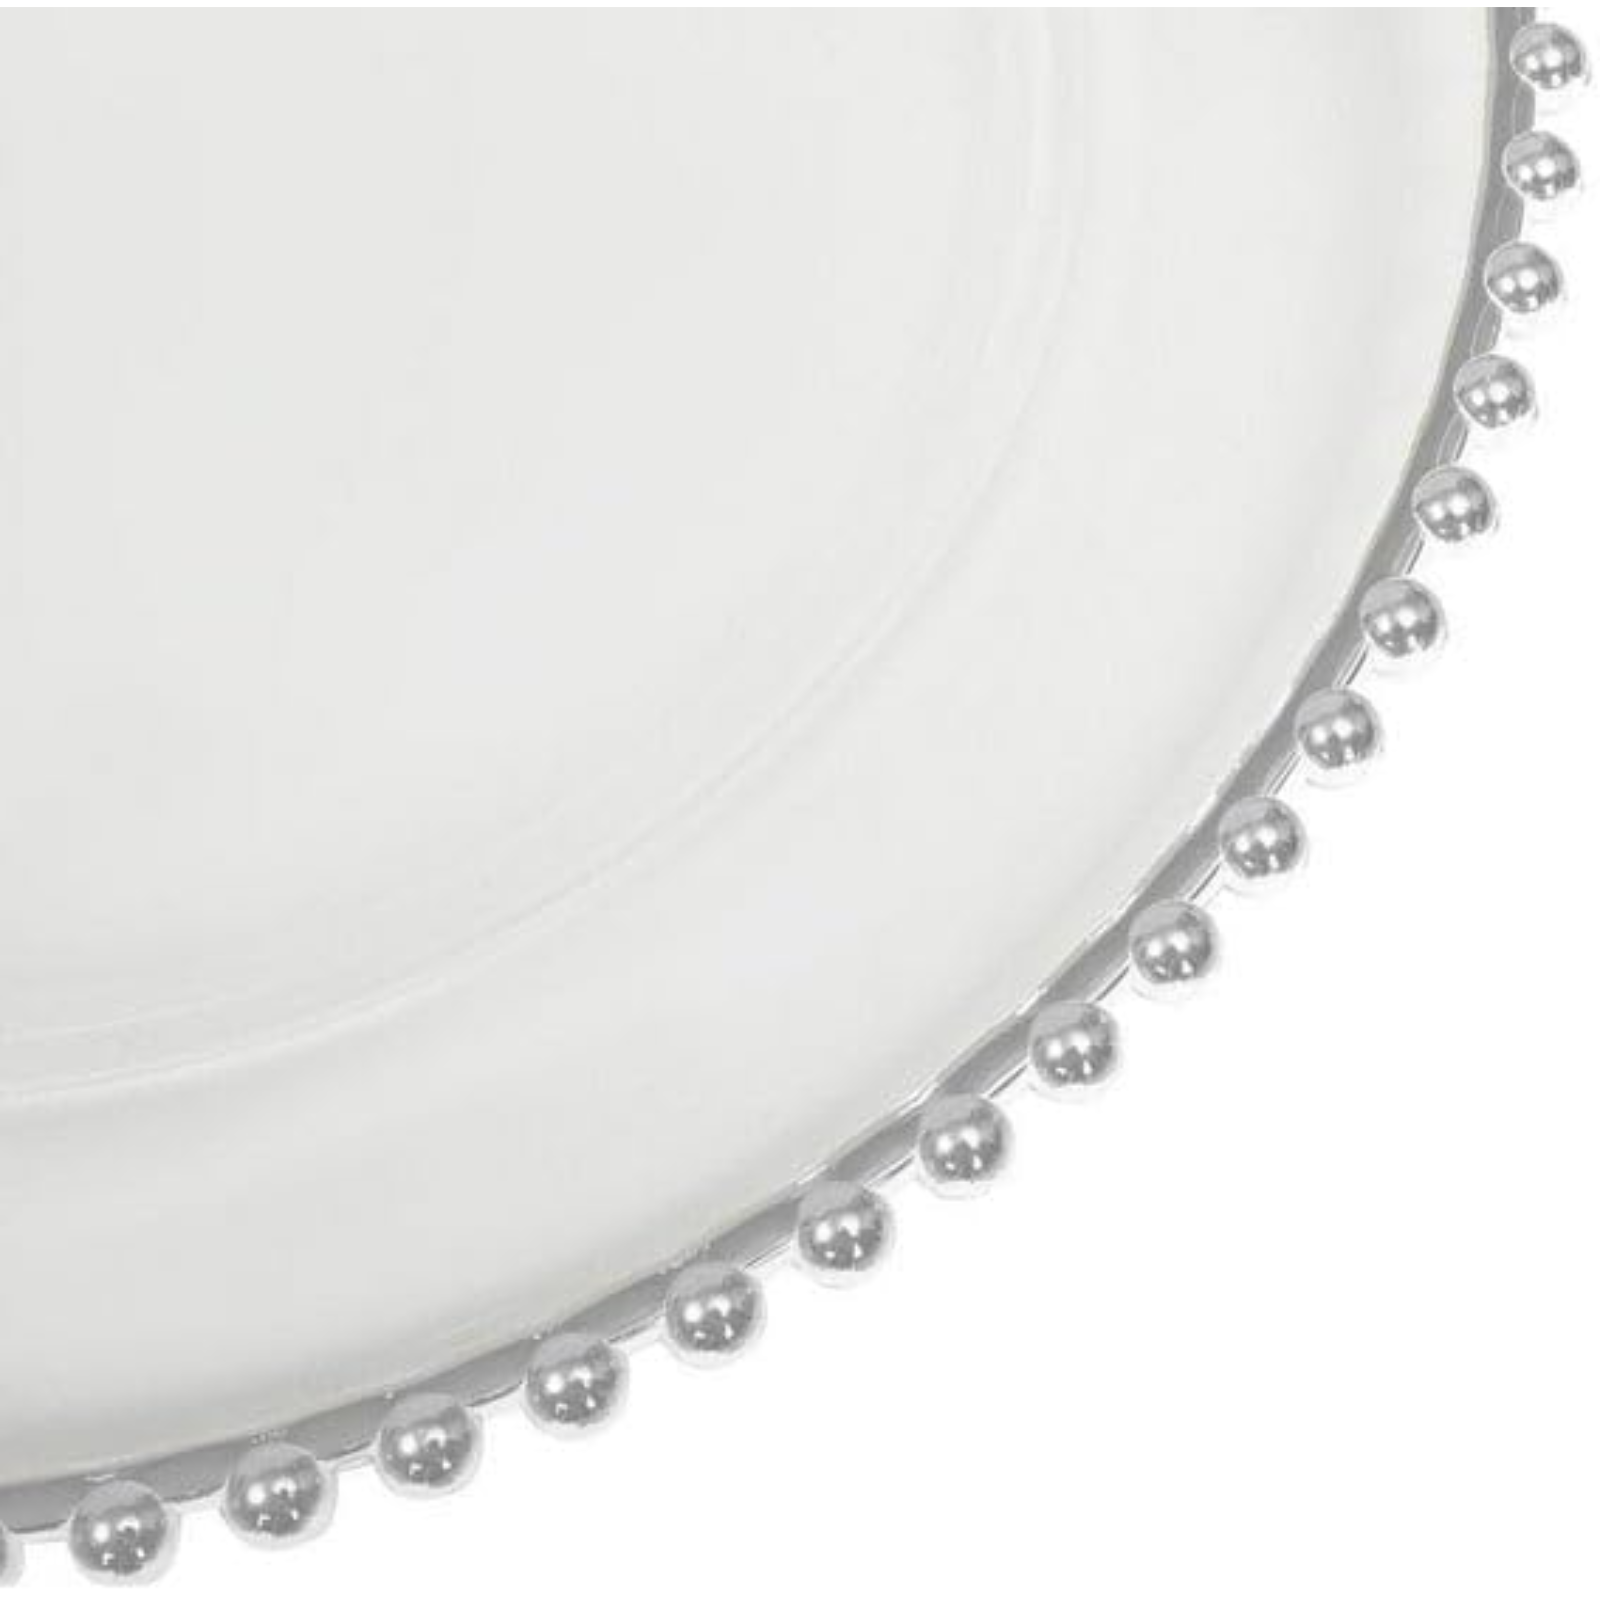 White & Silver Beaded EXTRA HEAVY Weight 10.25" Plastic Diner Plates  Decorline   